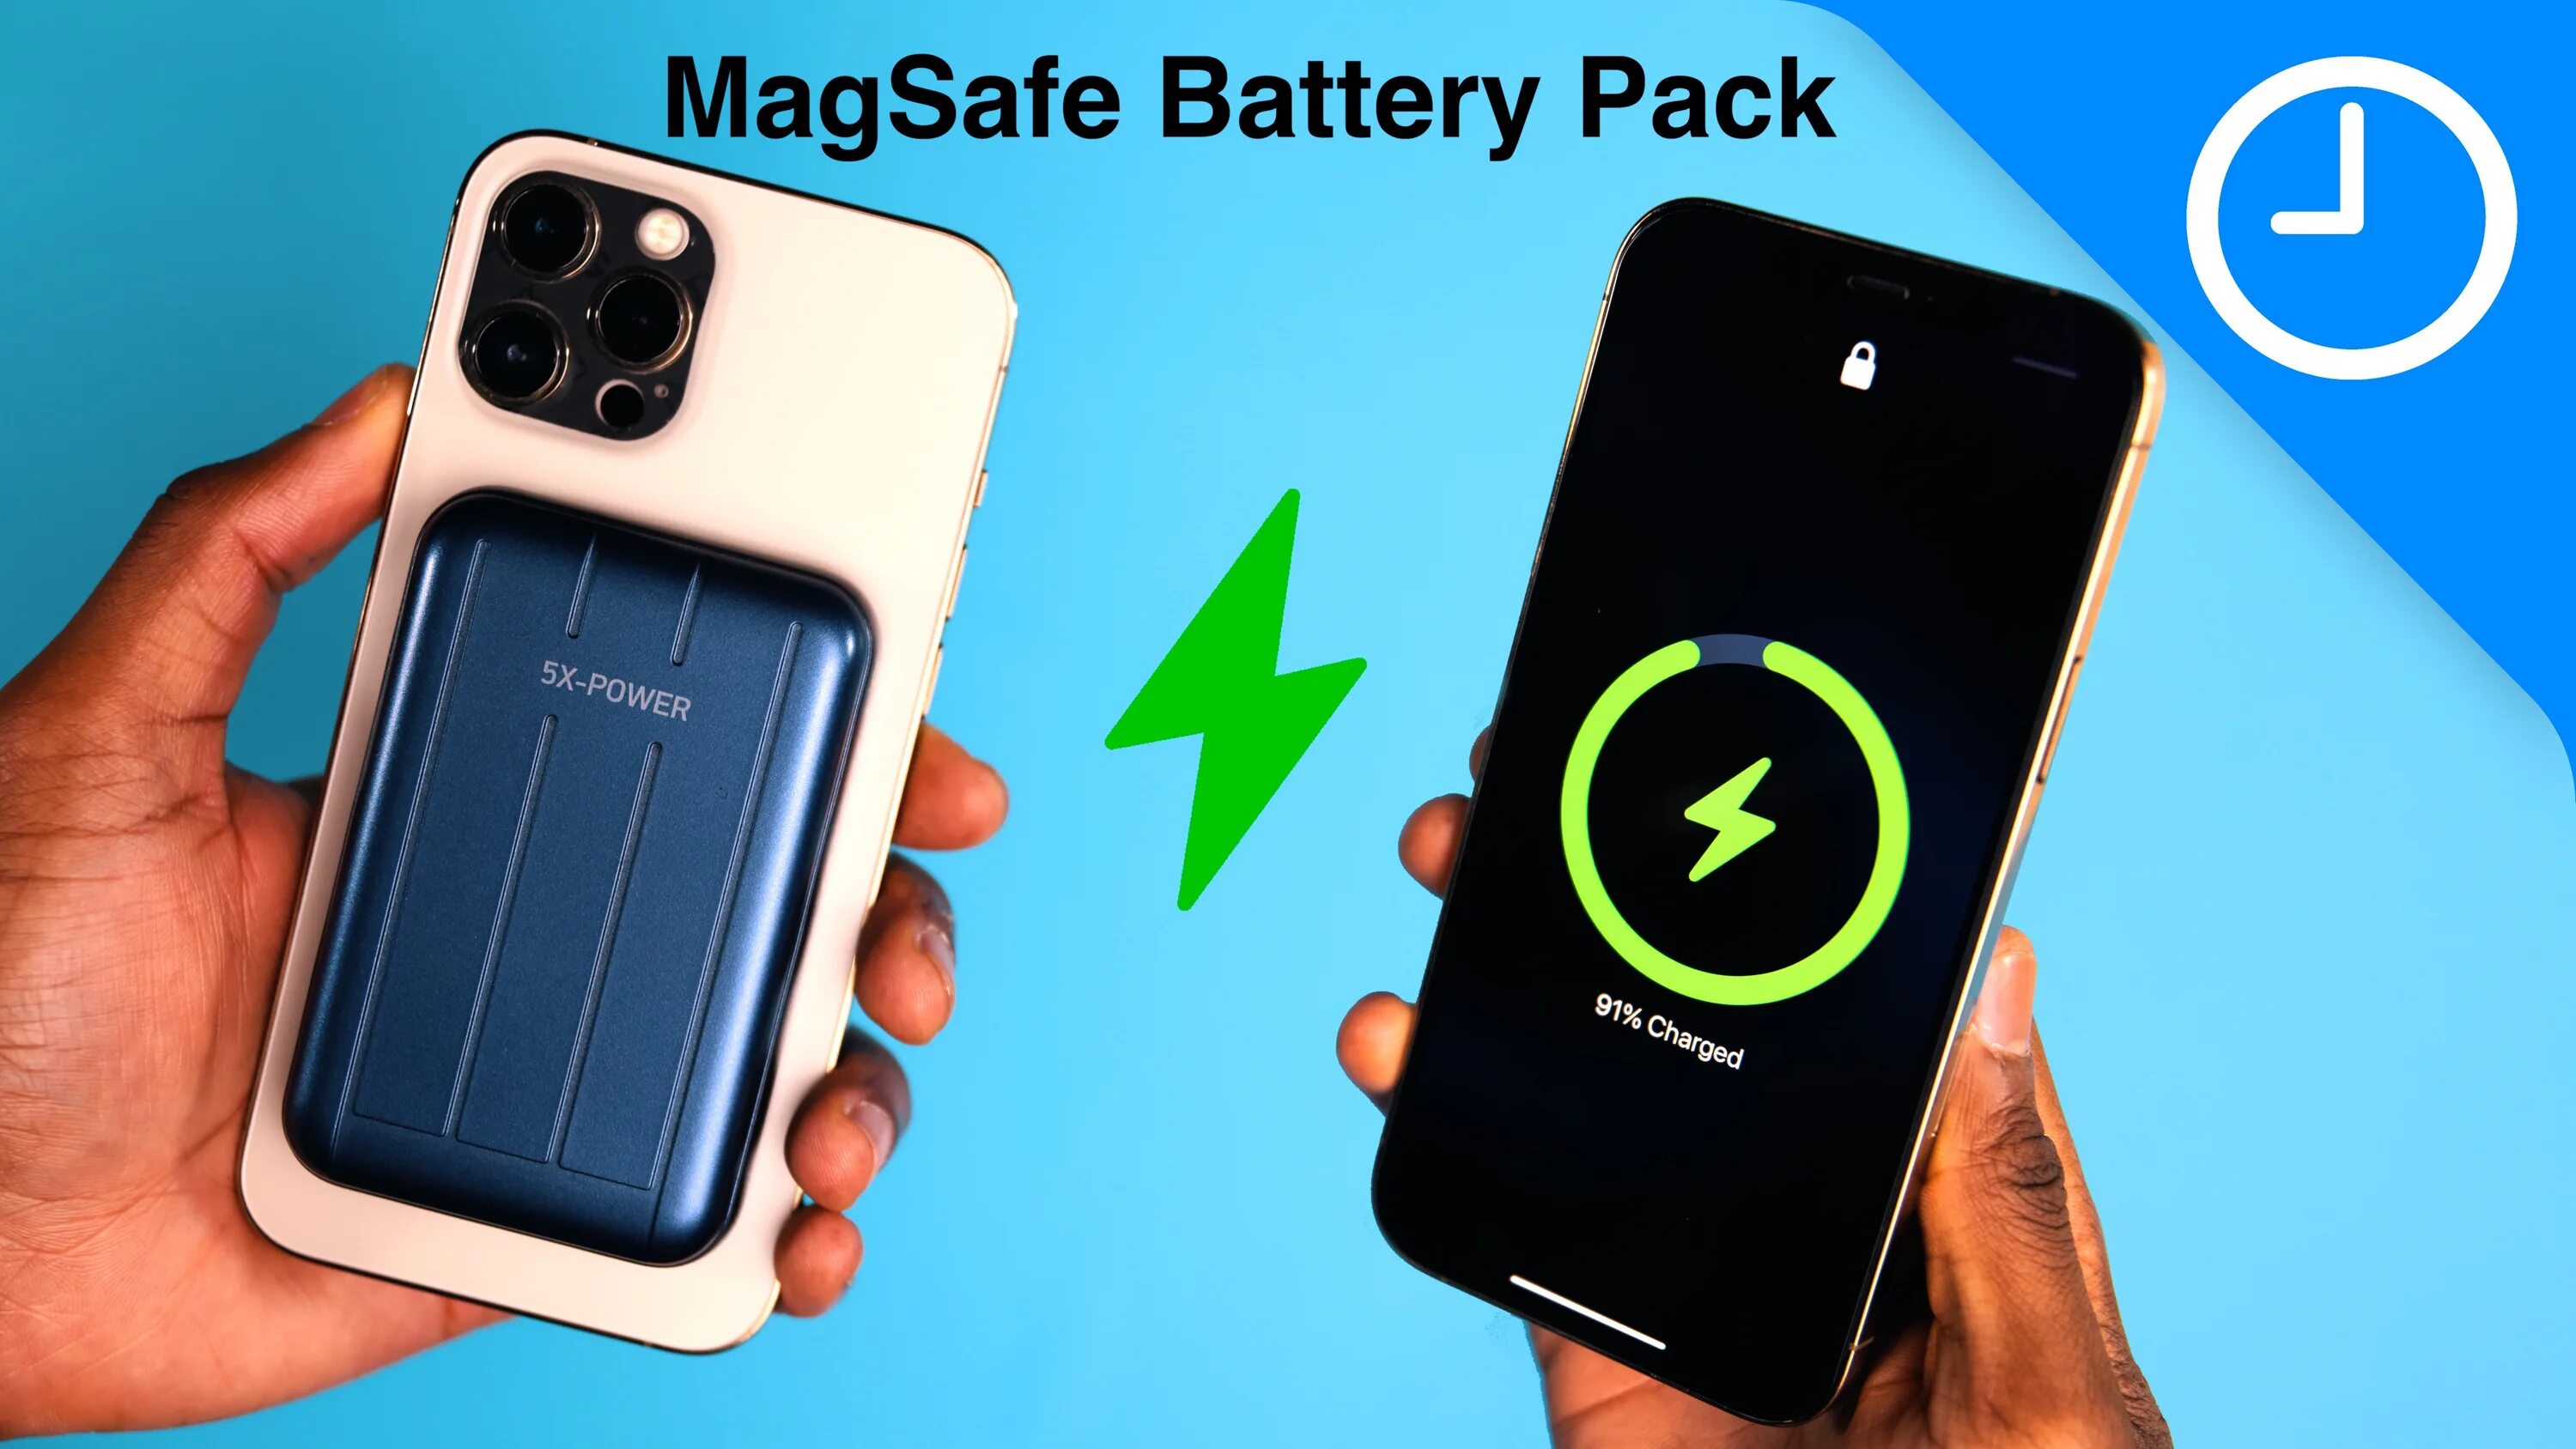 Magsafe iphone battery. MAGSAFE Battery Pack iphone 12. Зарядка MAGSAFE Battery Pack. Apple MAGSAFE Battery Pack. MAGSAFE Battery Pack iphone 12 Pro Max.